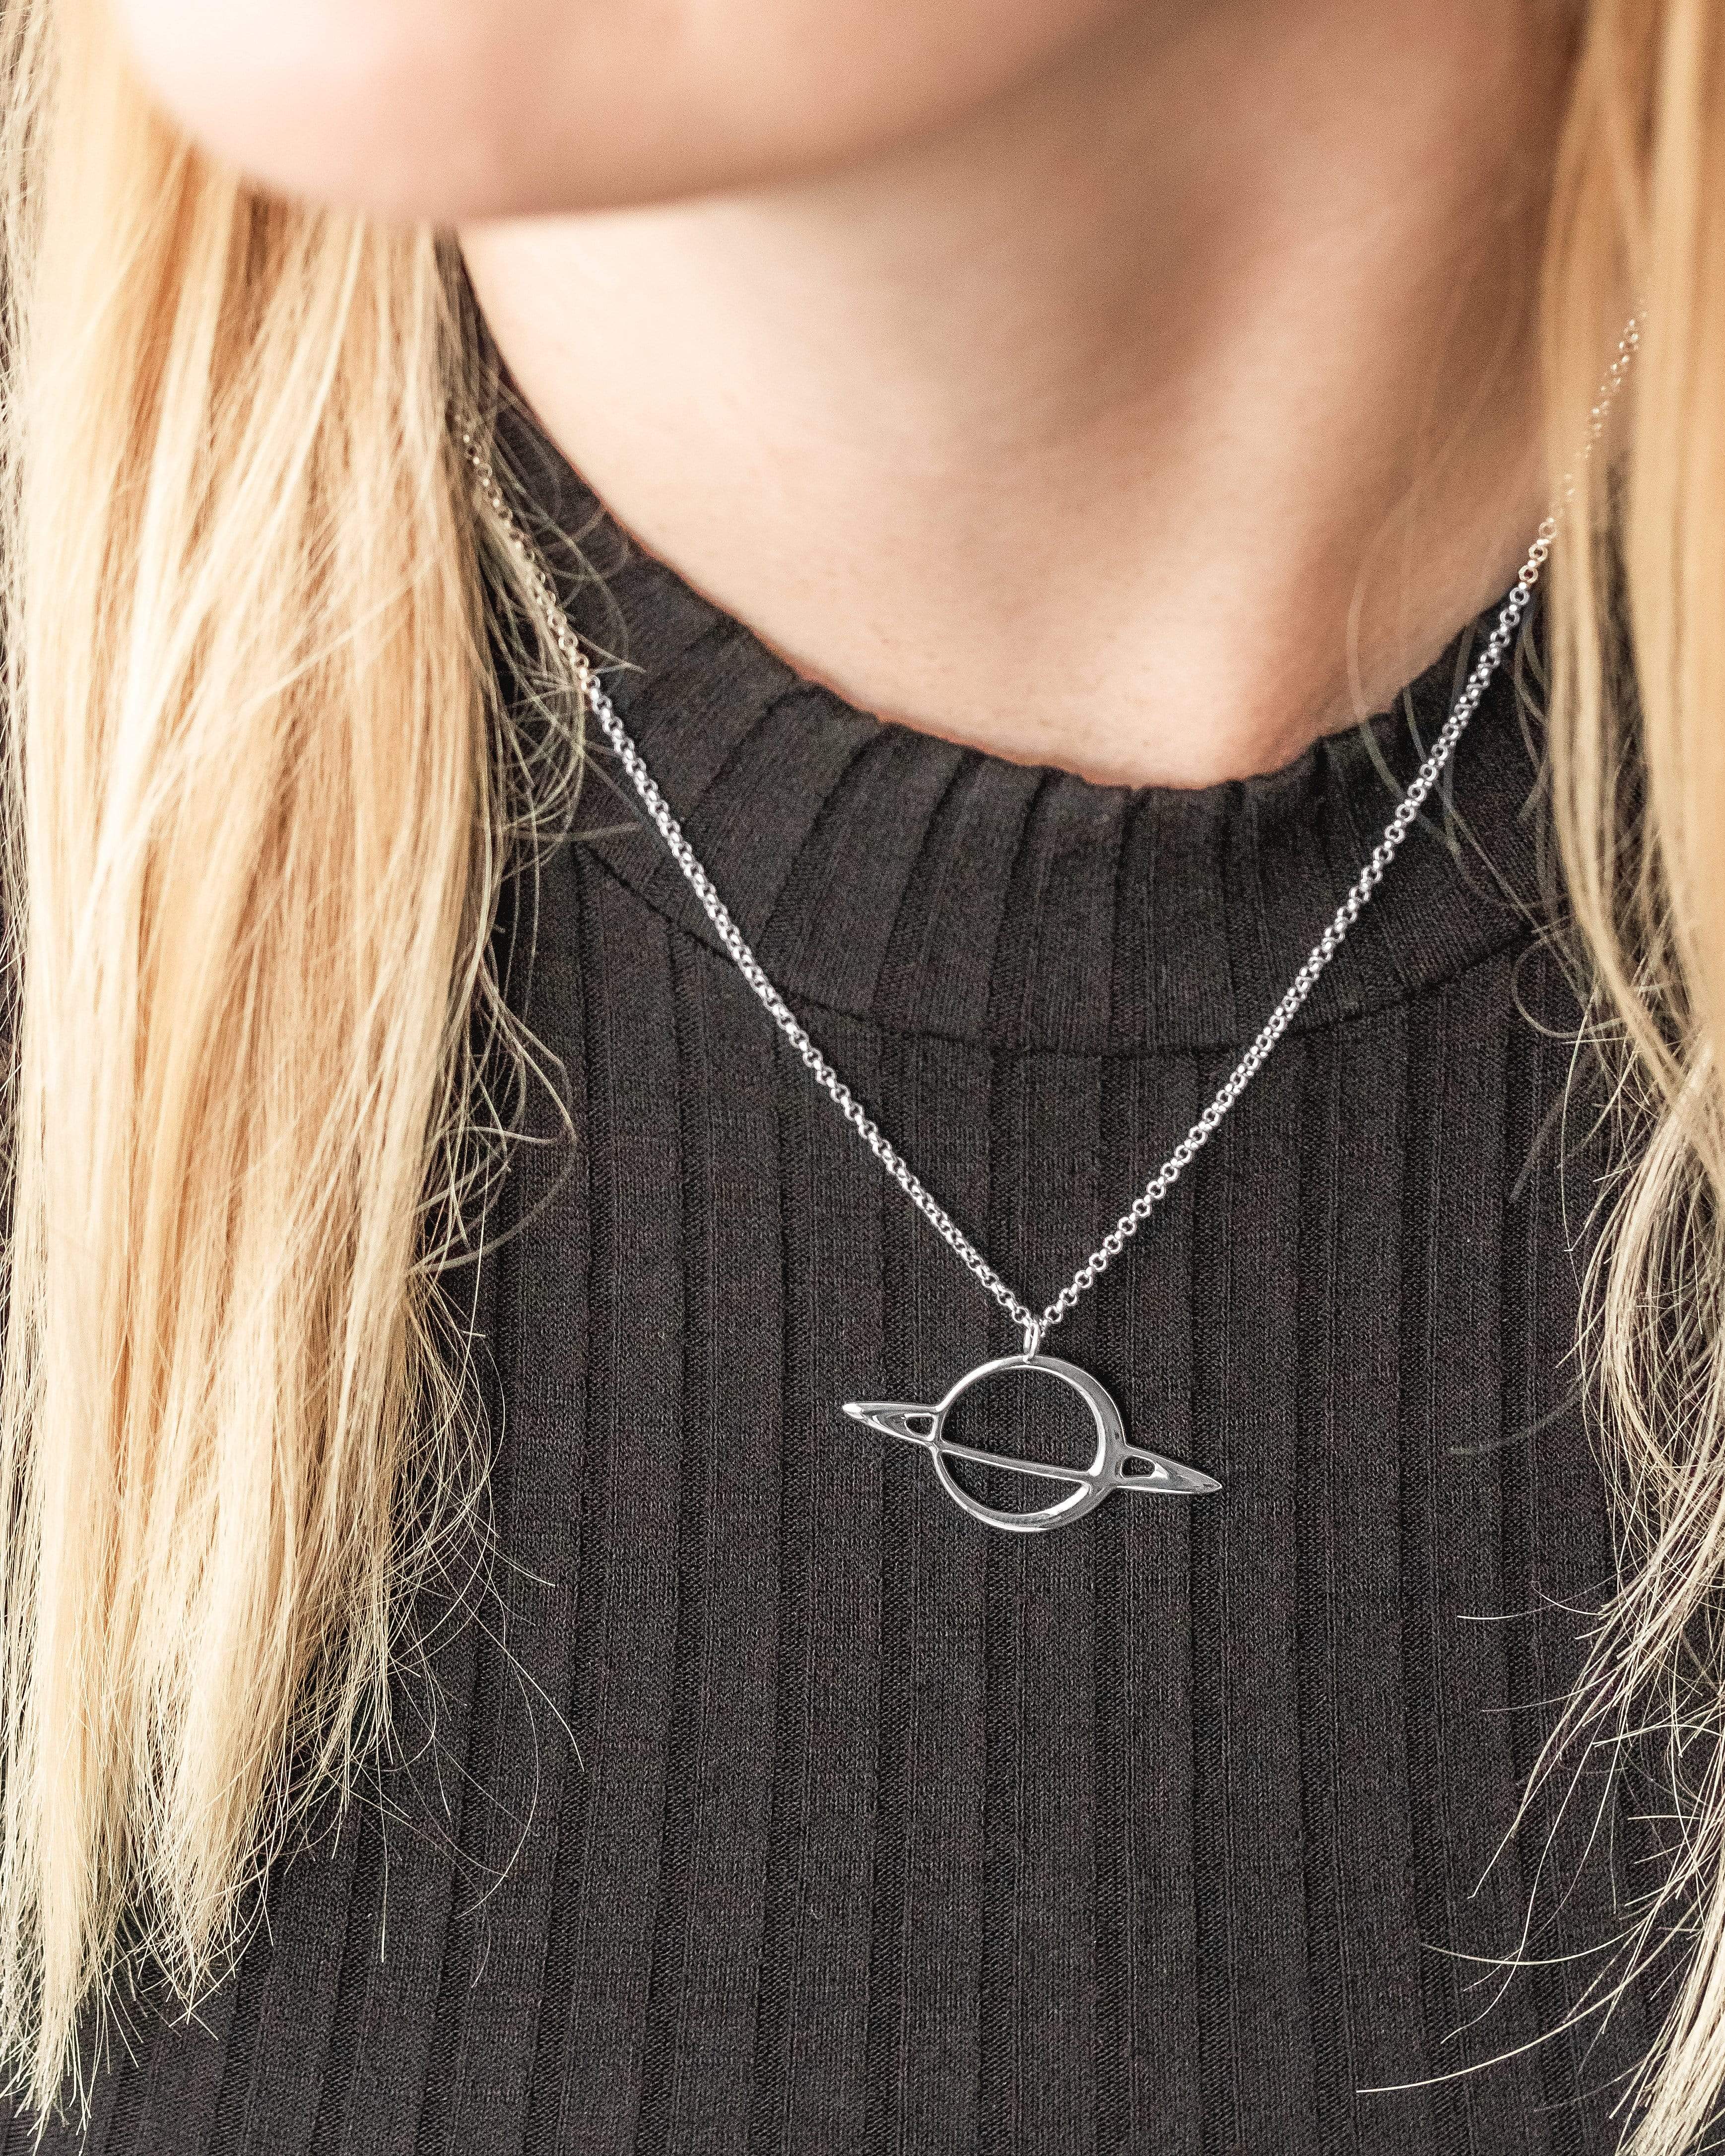 Saturn Planet Necklace - A Common Thread